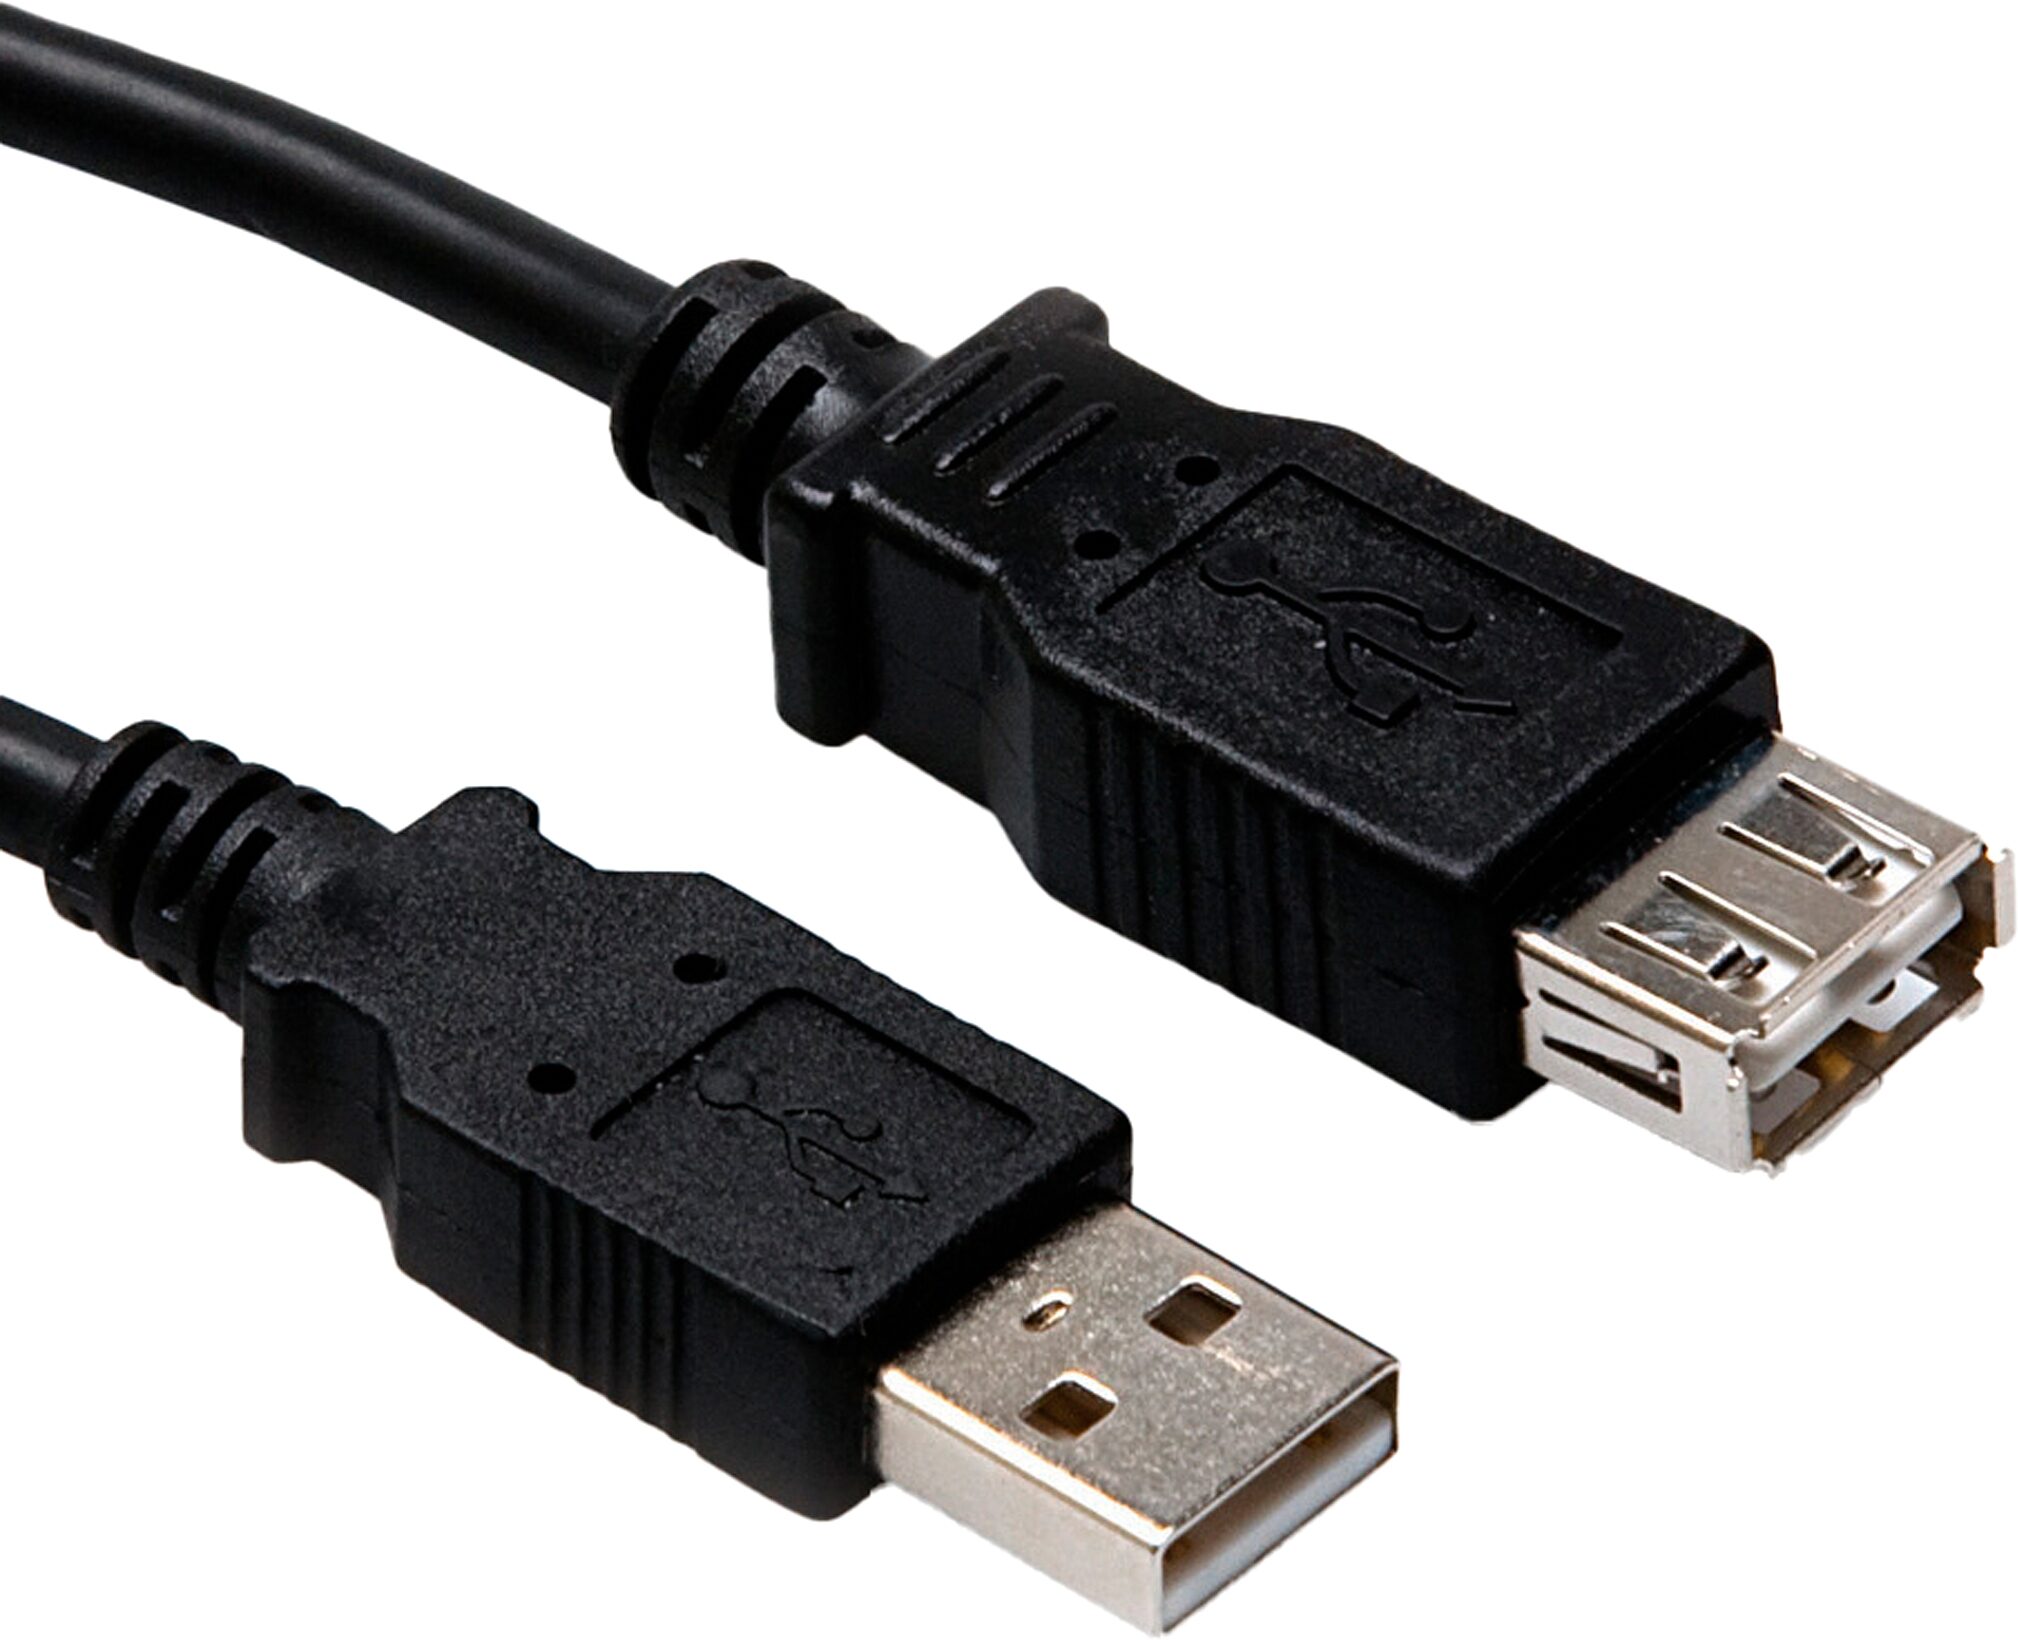 Hosa USB-210AF High-Speed USB Extension Cable zZounds